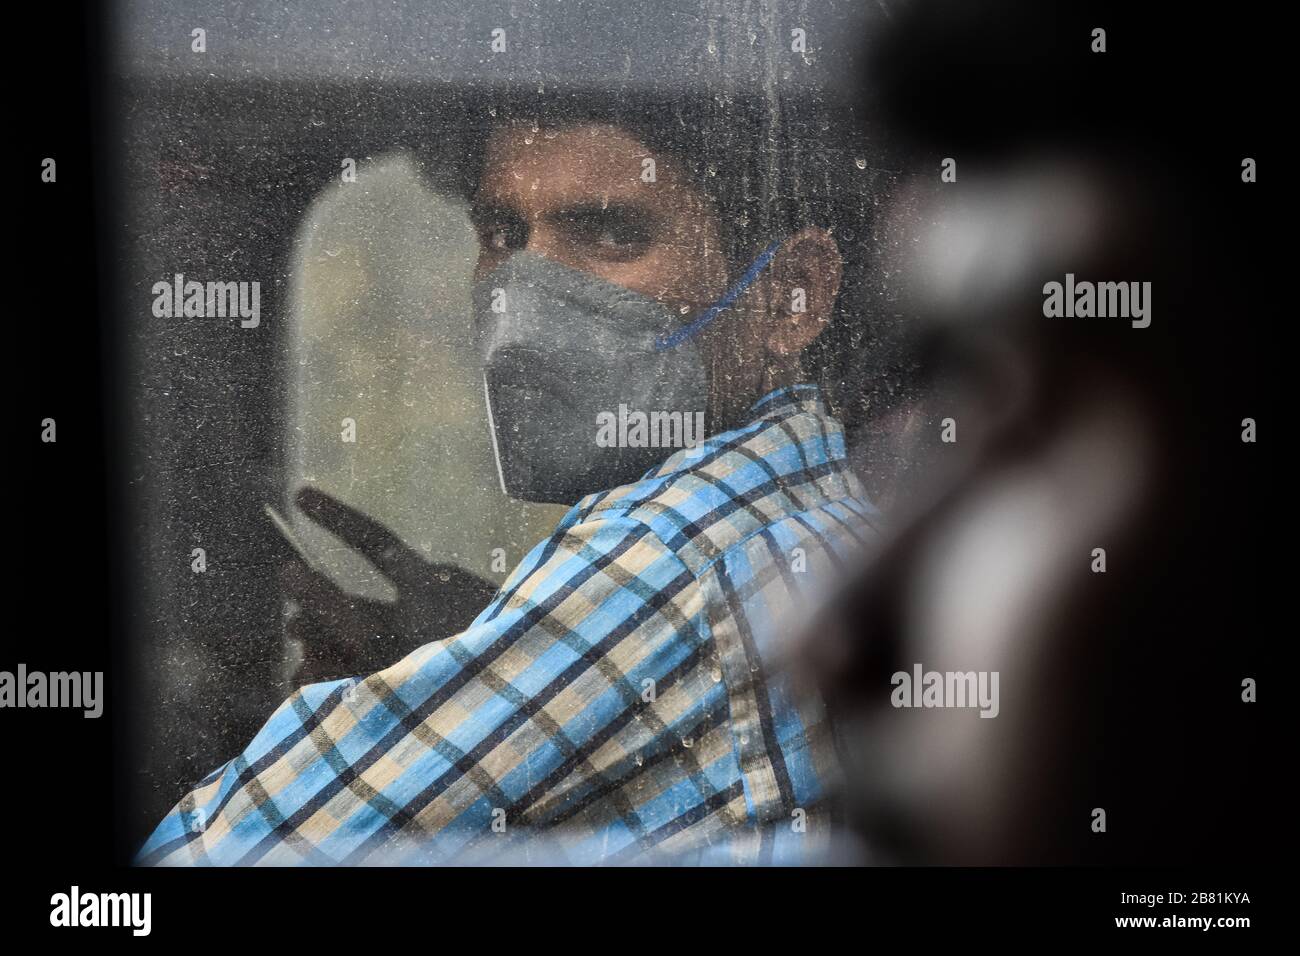 A man wearing a facemask as a preventive measure against the COVID-19 coronavirus.India has reported 197 cases of the Covid-19 Coronavirus and 4 patients has died as a result. Stock Photo